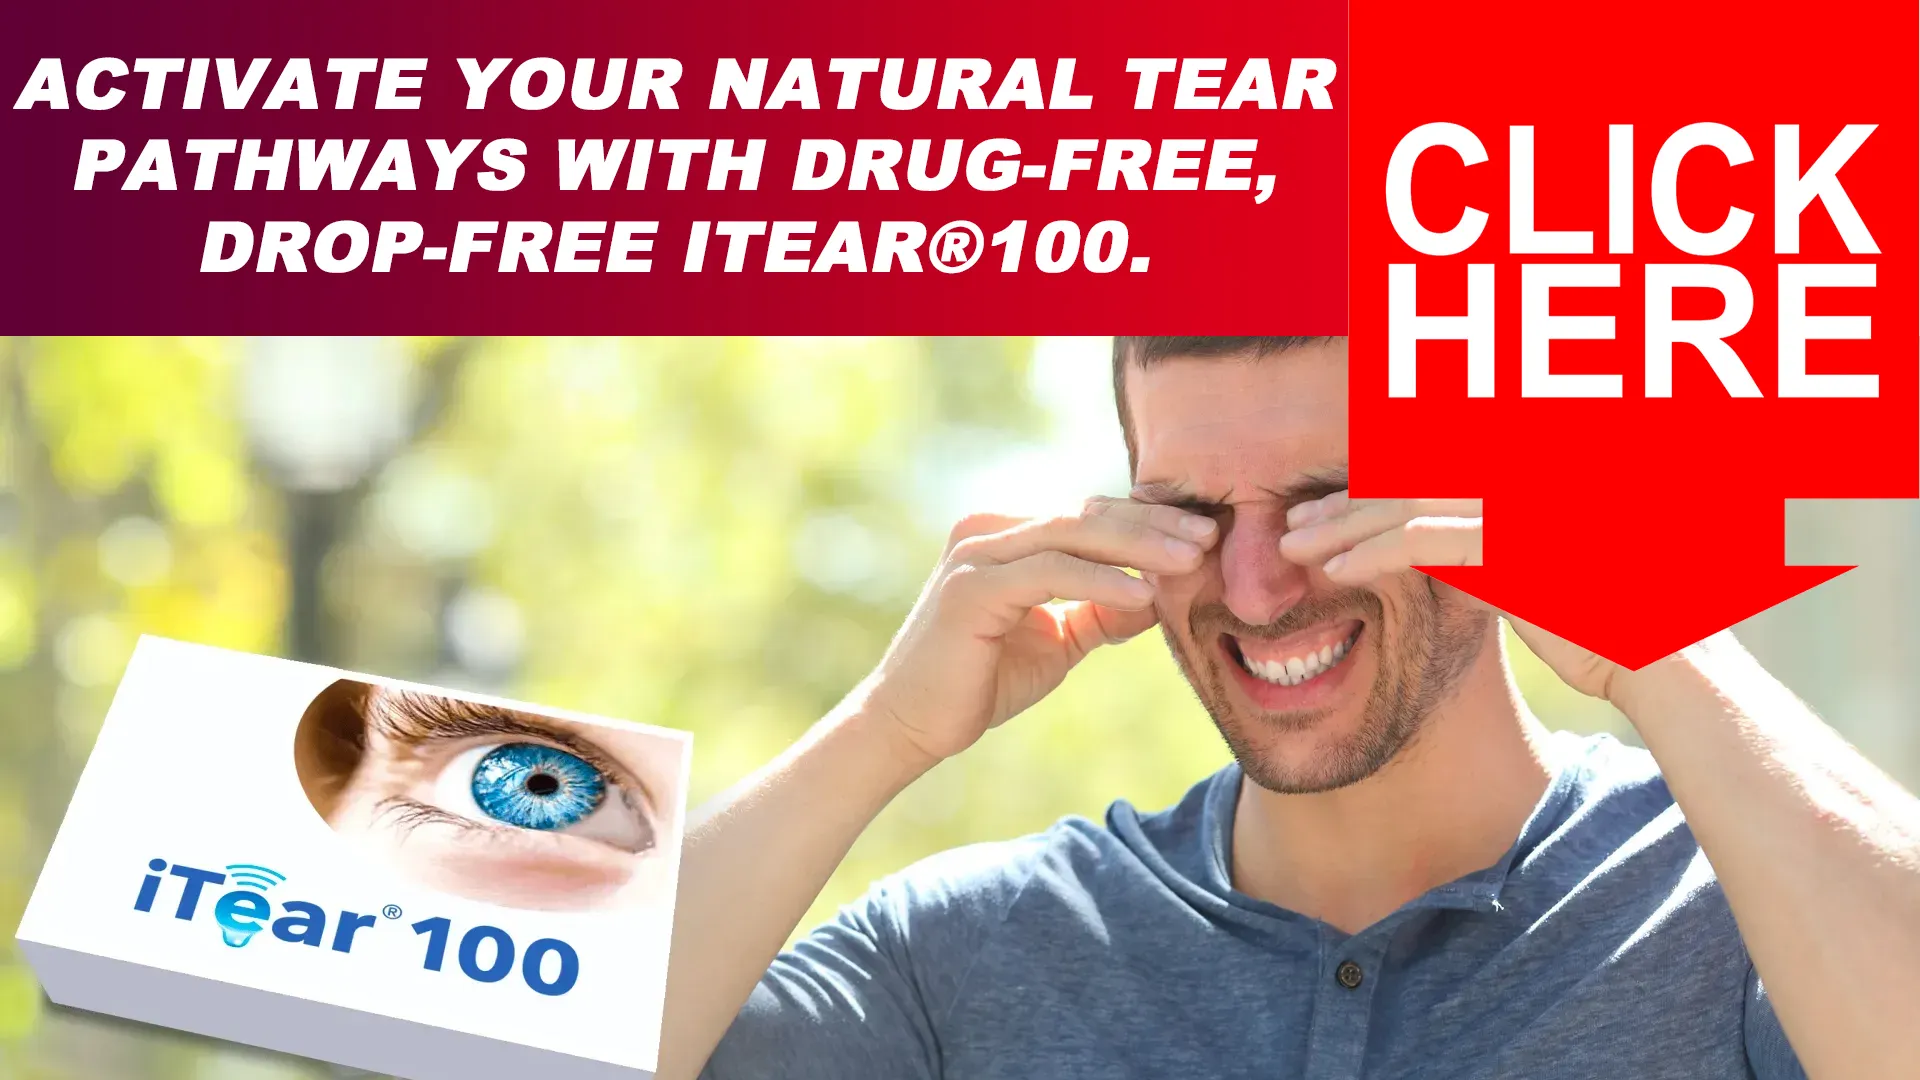 The Ease and Efficacy of iTear100